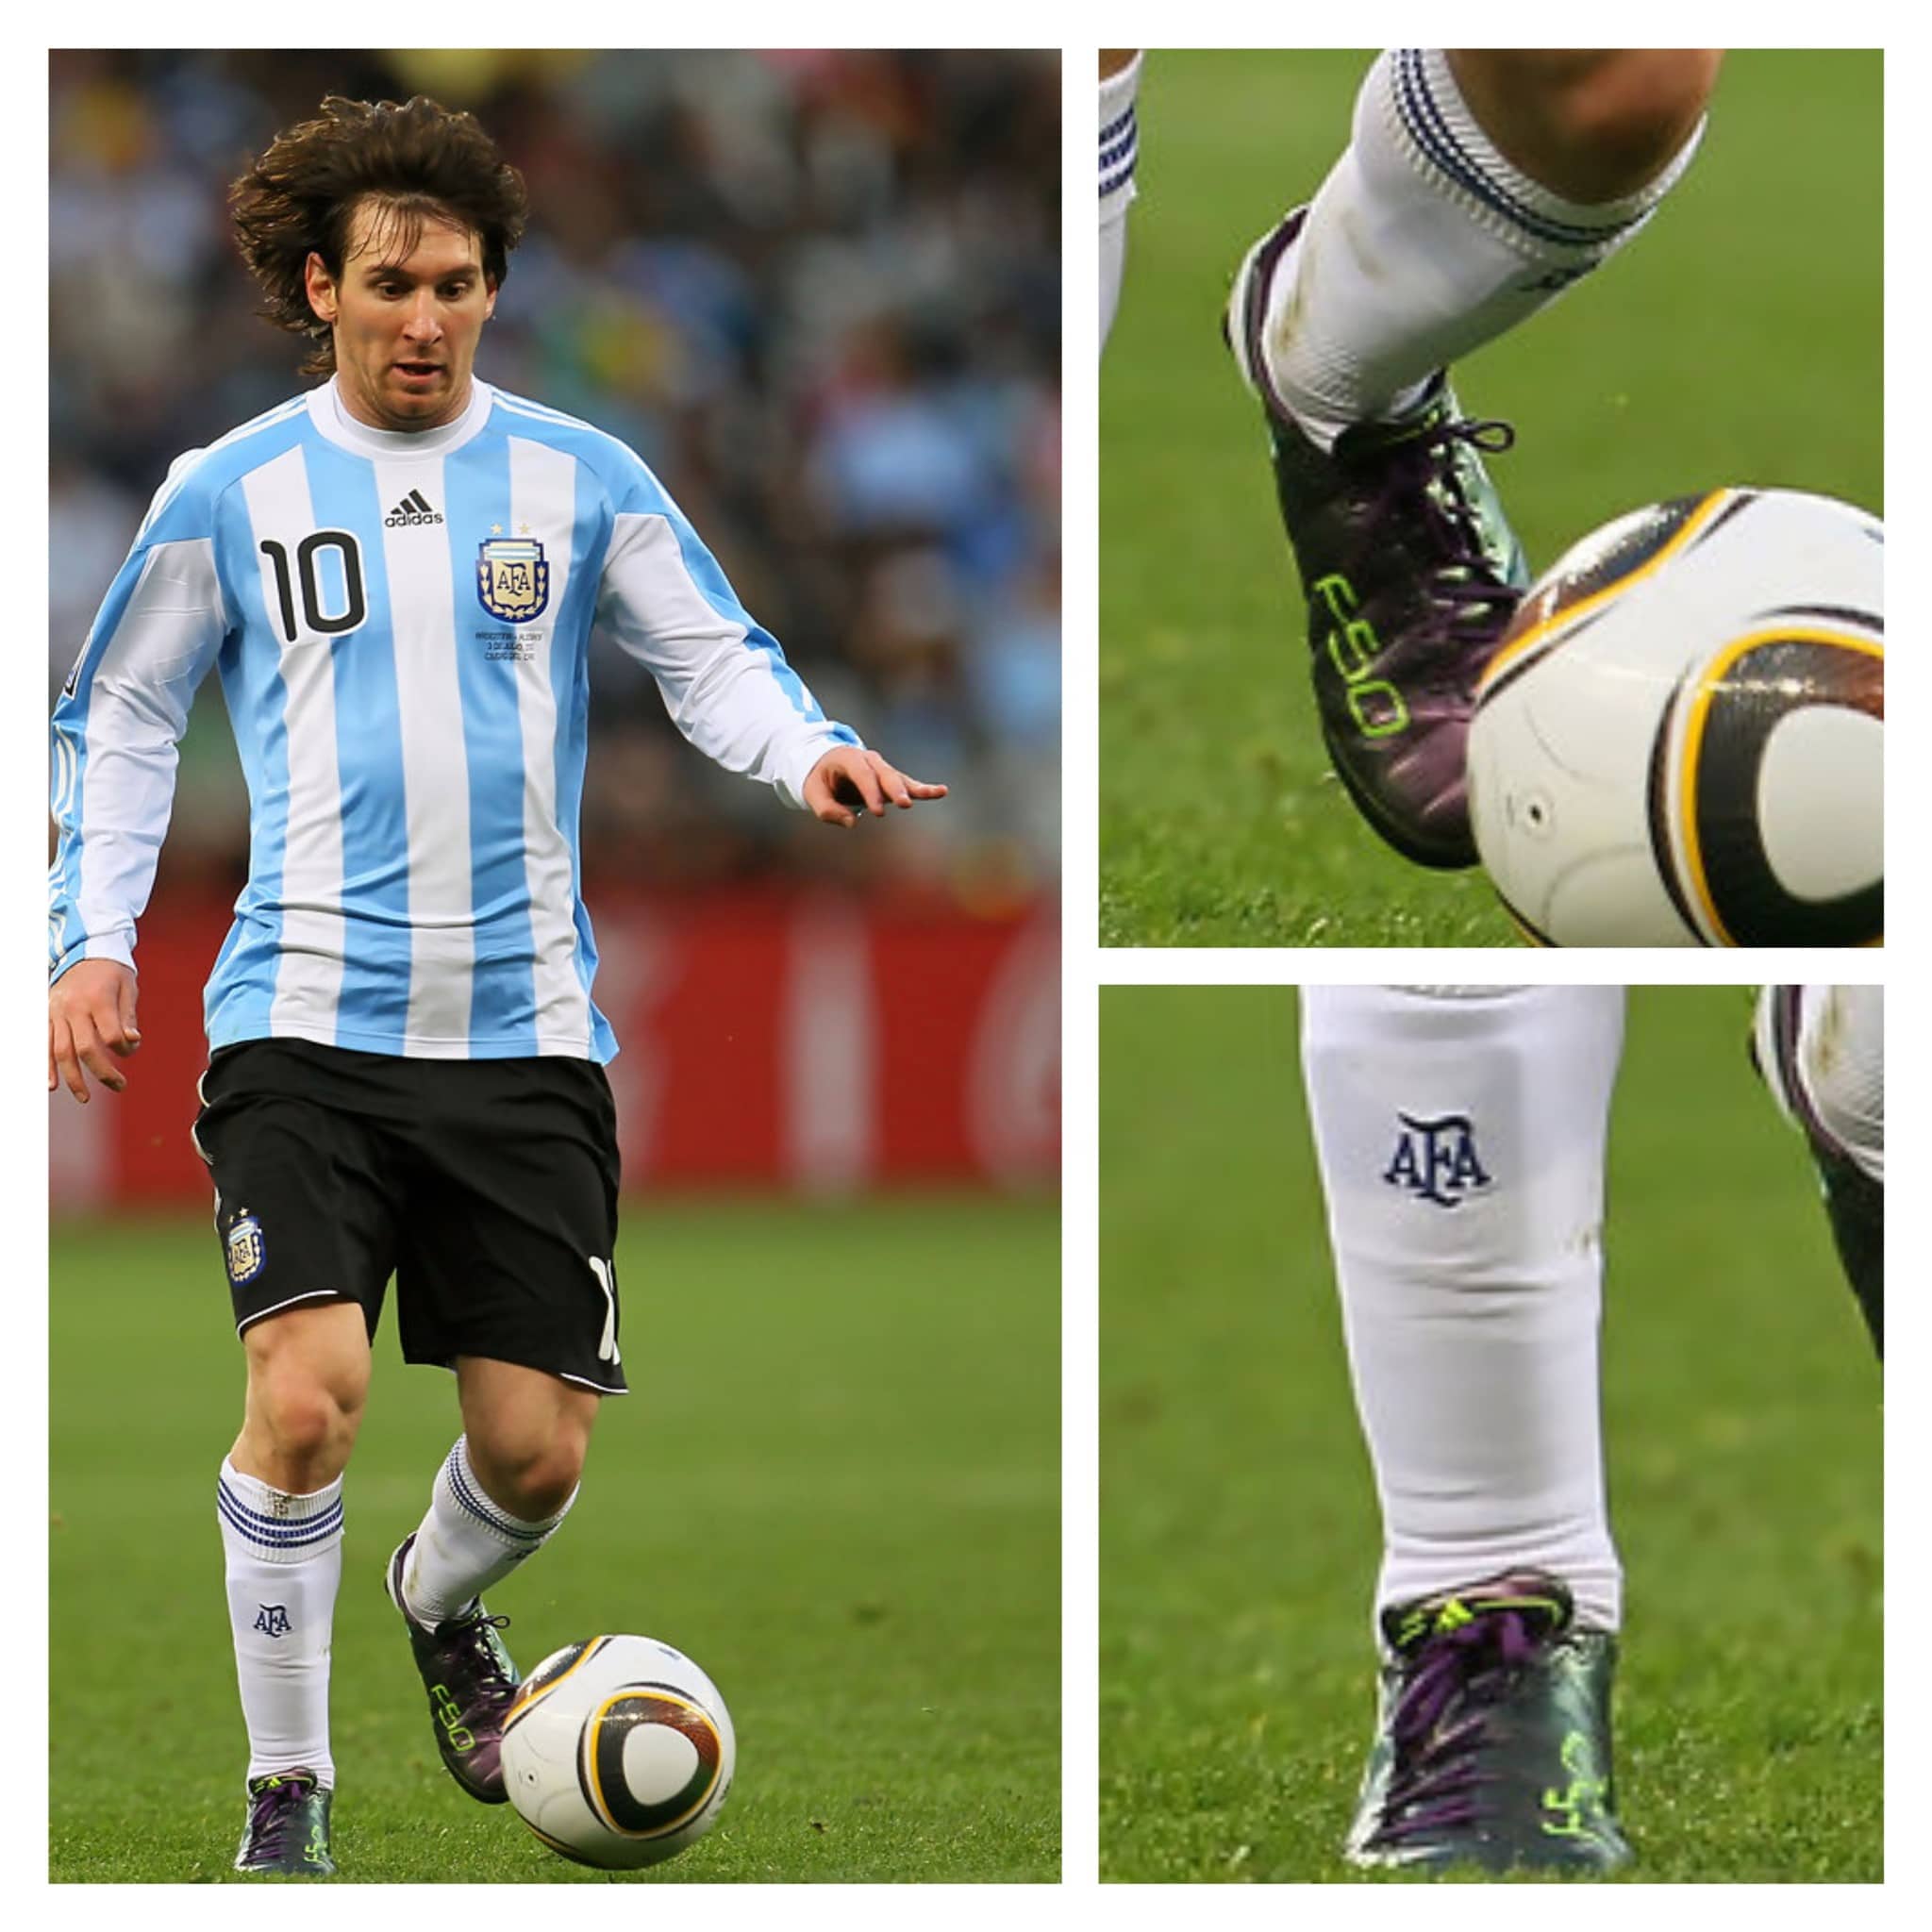 What Football Boots are Lionel Messi Wearing? - Boot History - adizero